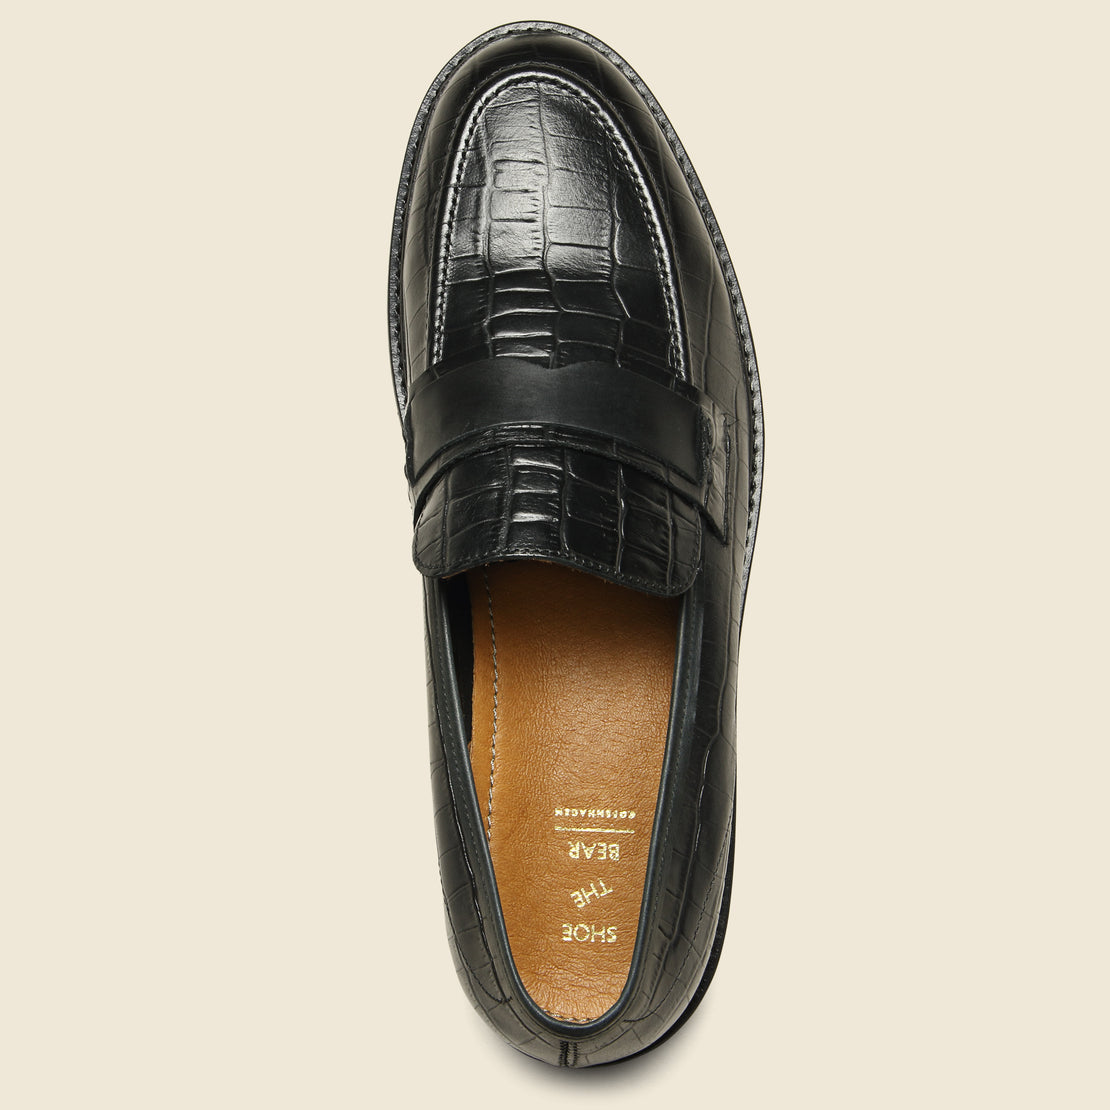 Farley Croc Loafer - Black - Shoe the Bear - STAG Provisions - Shoes - Oxfords